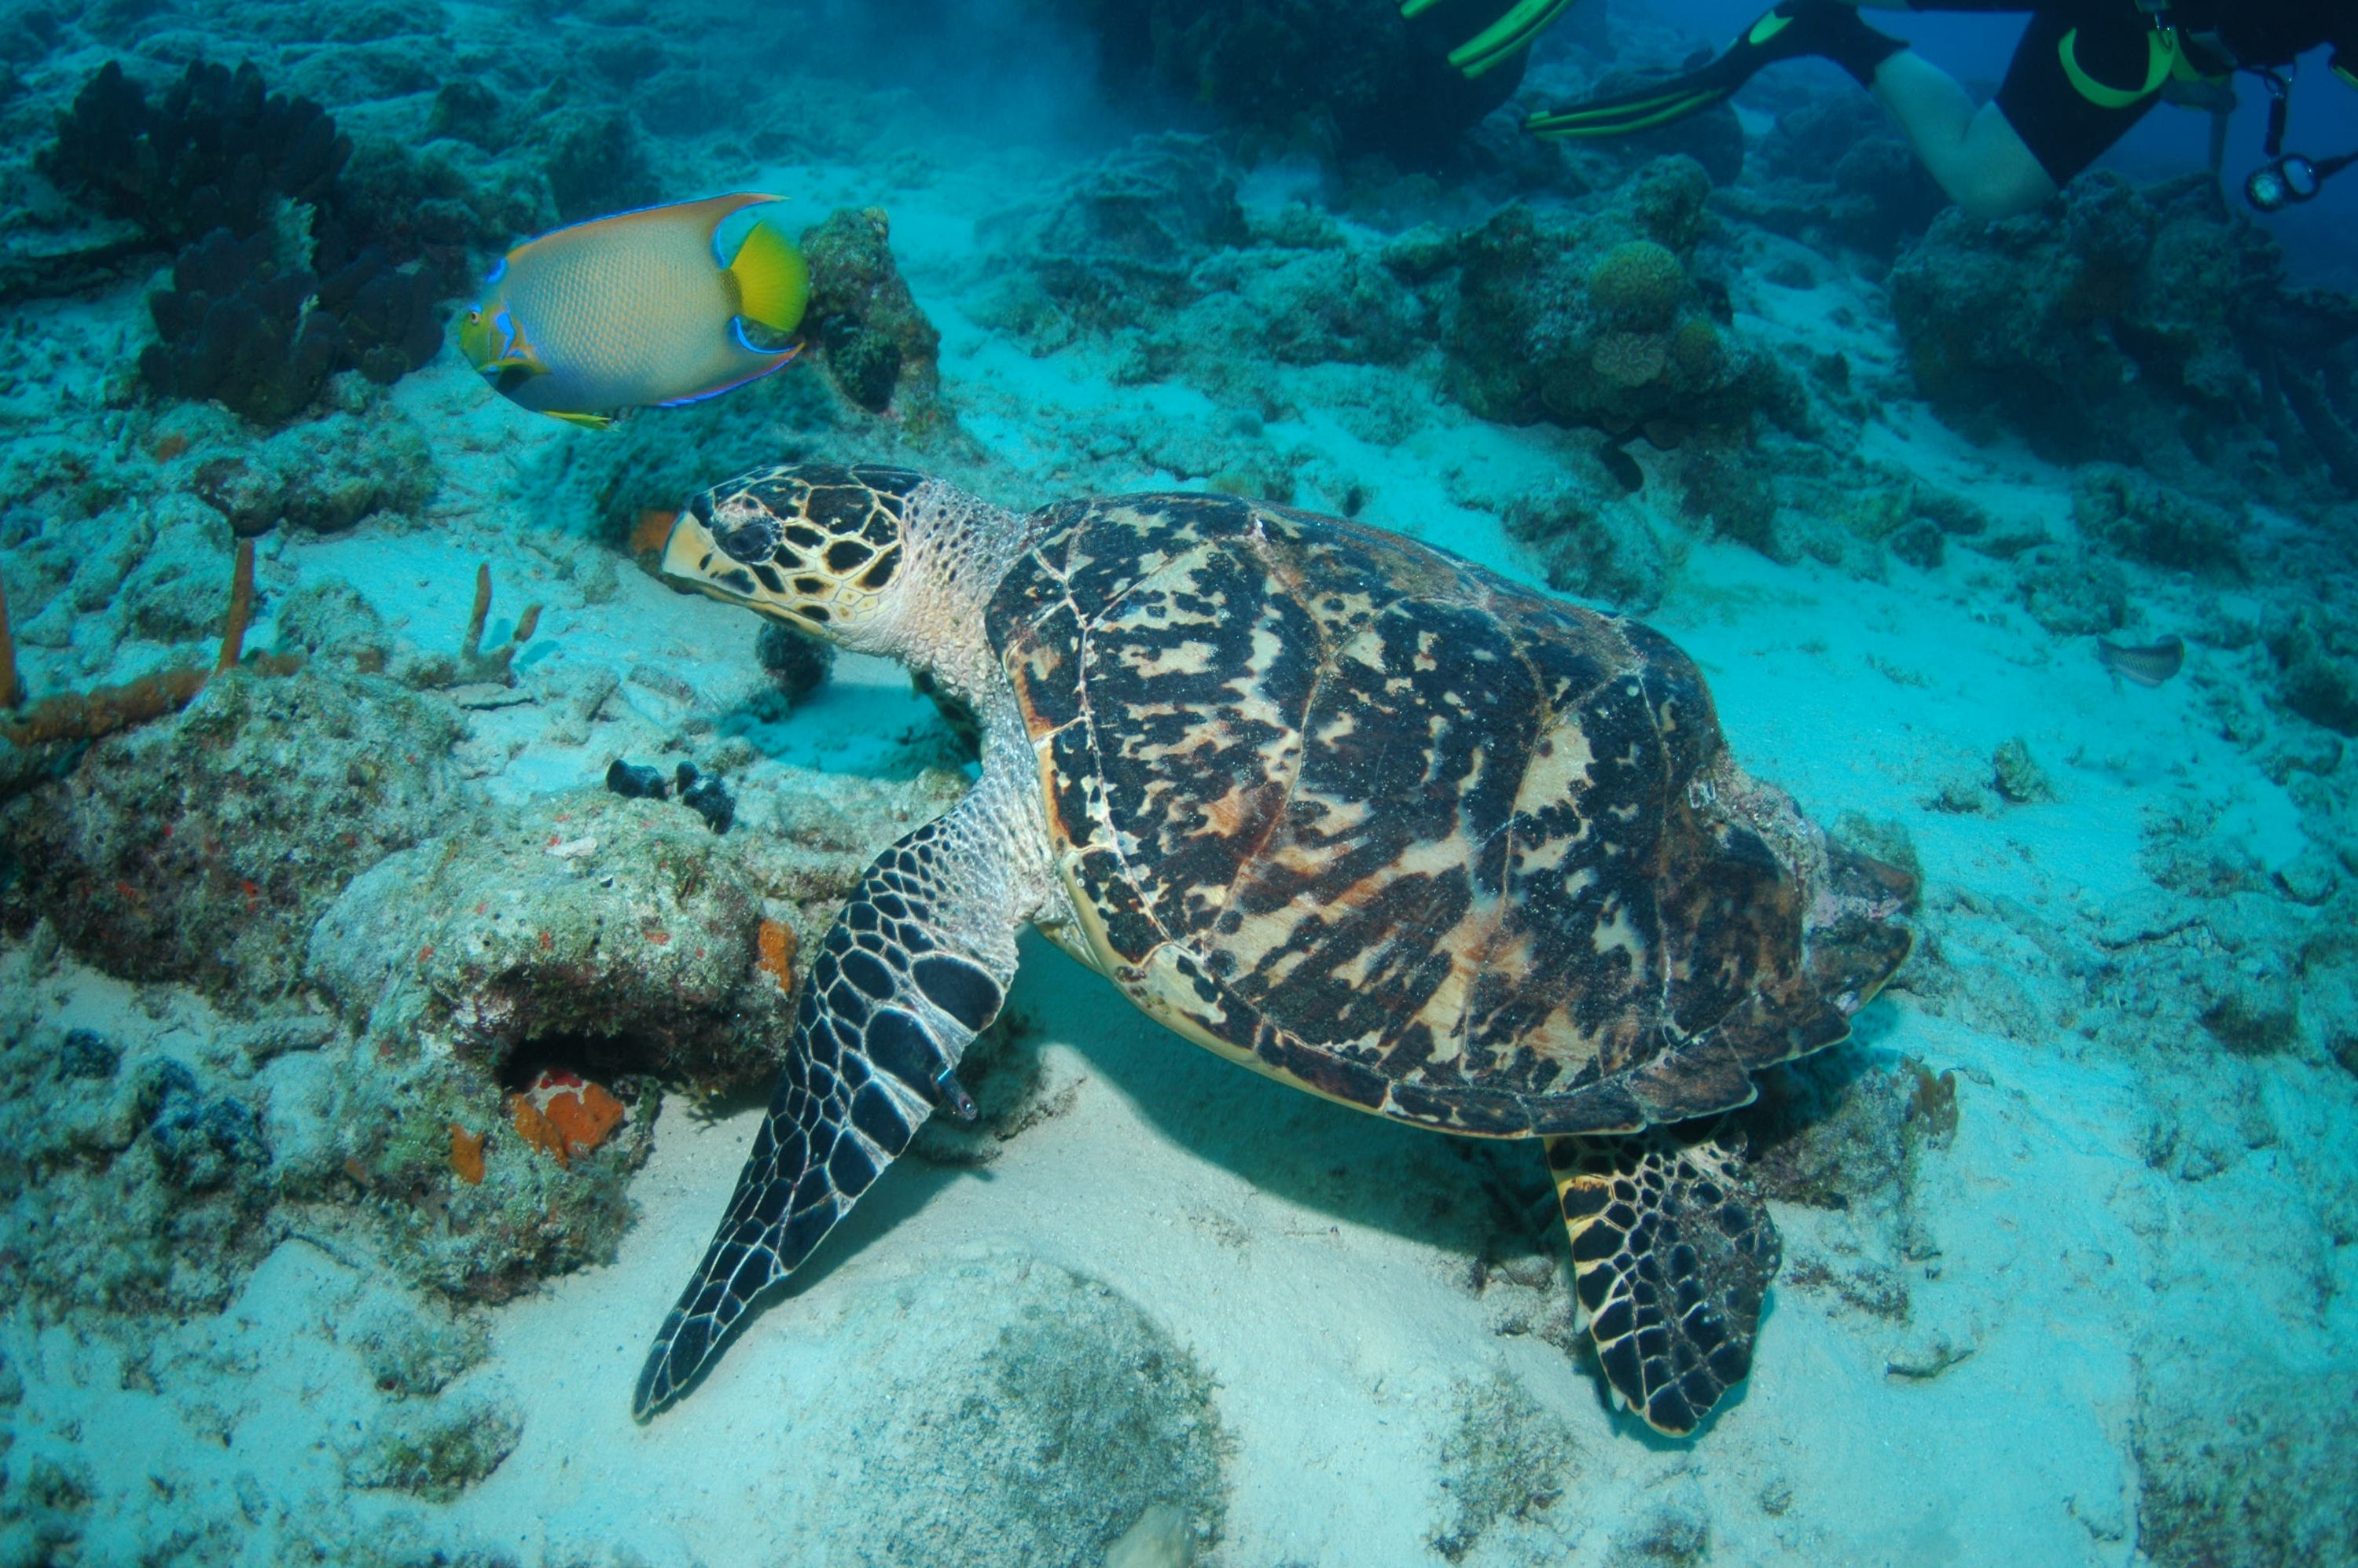 Hawksbill Turtle missing a large chunk of shell